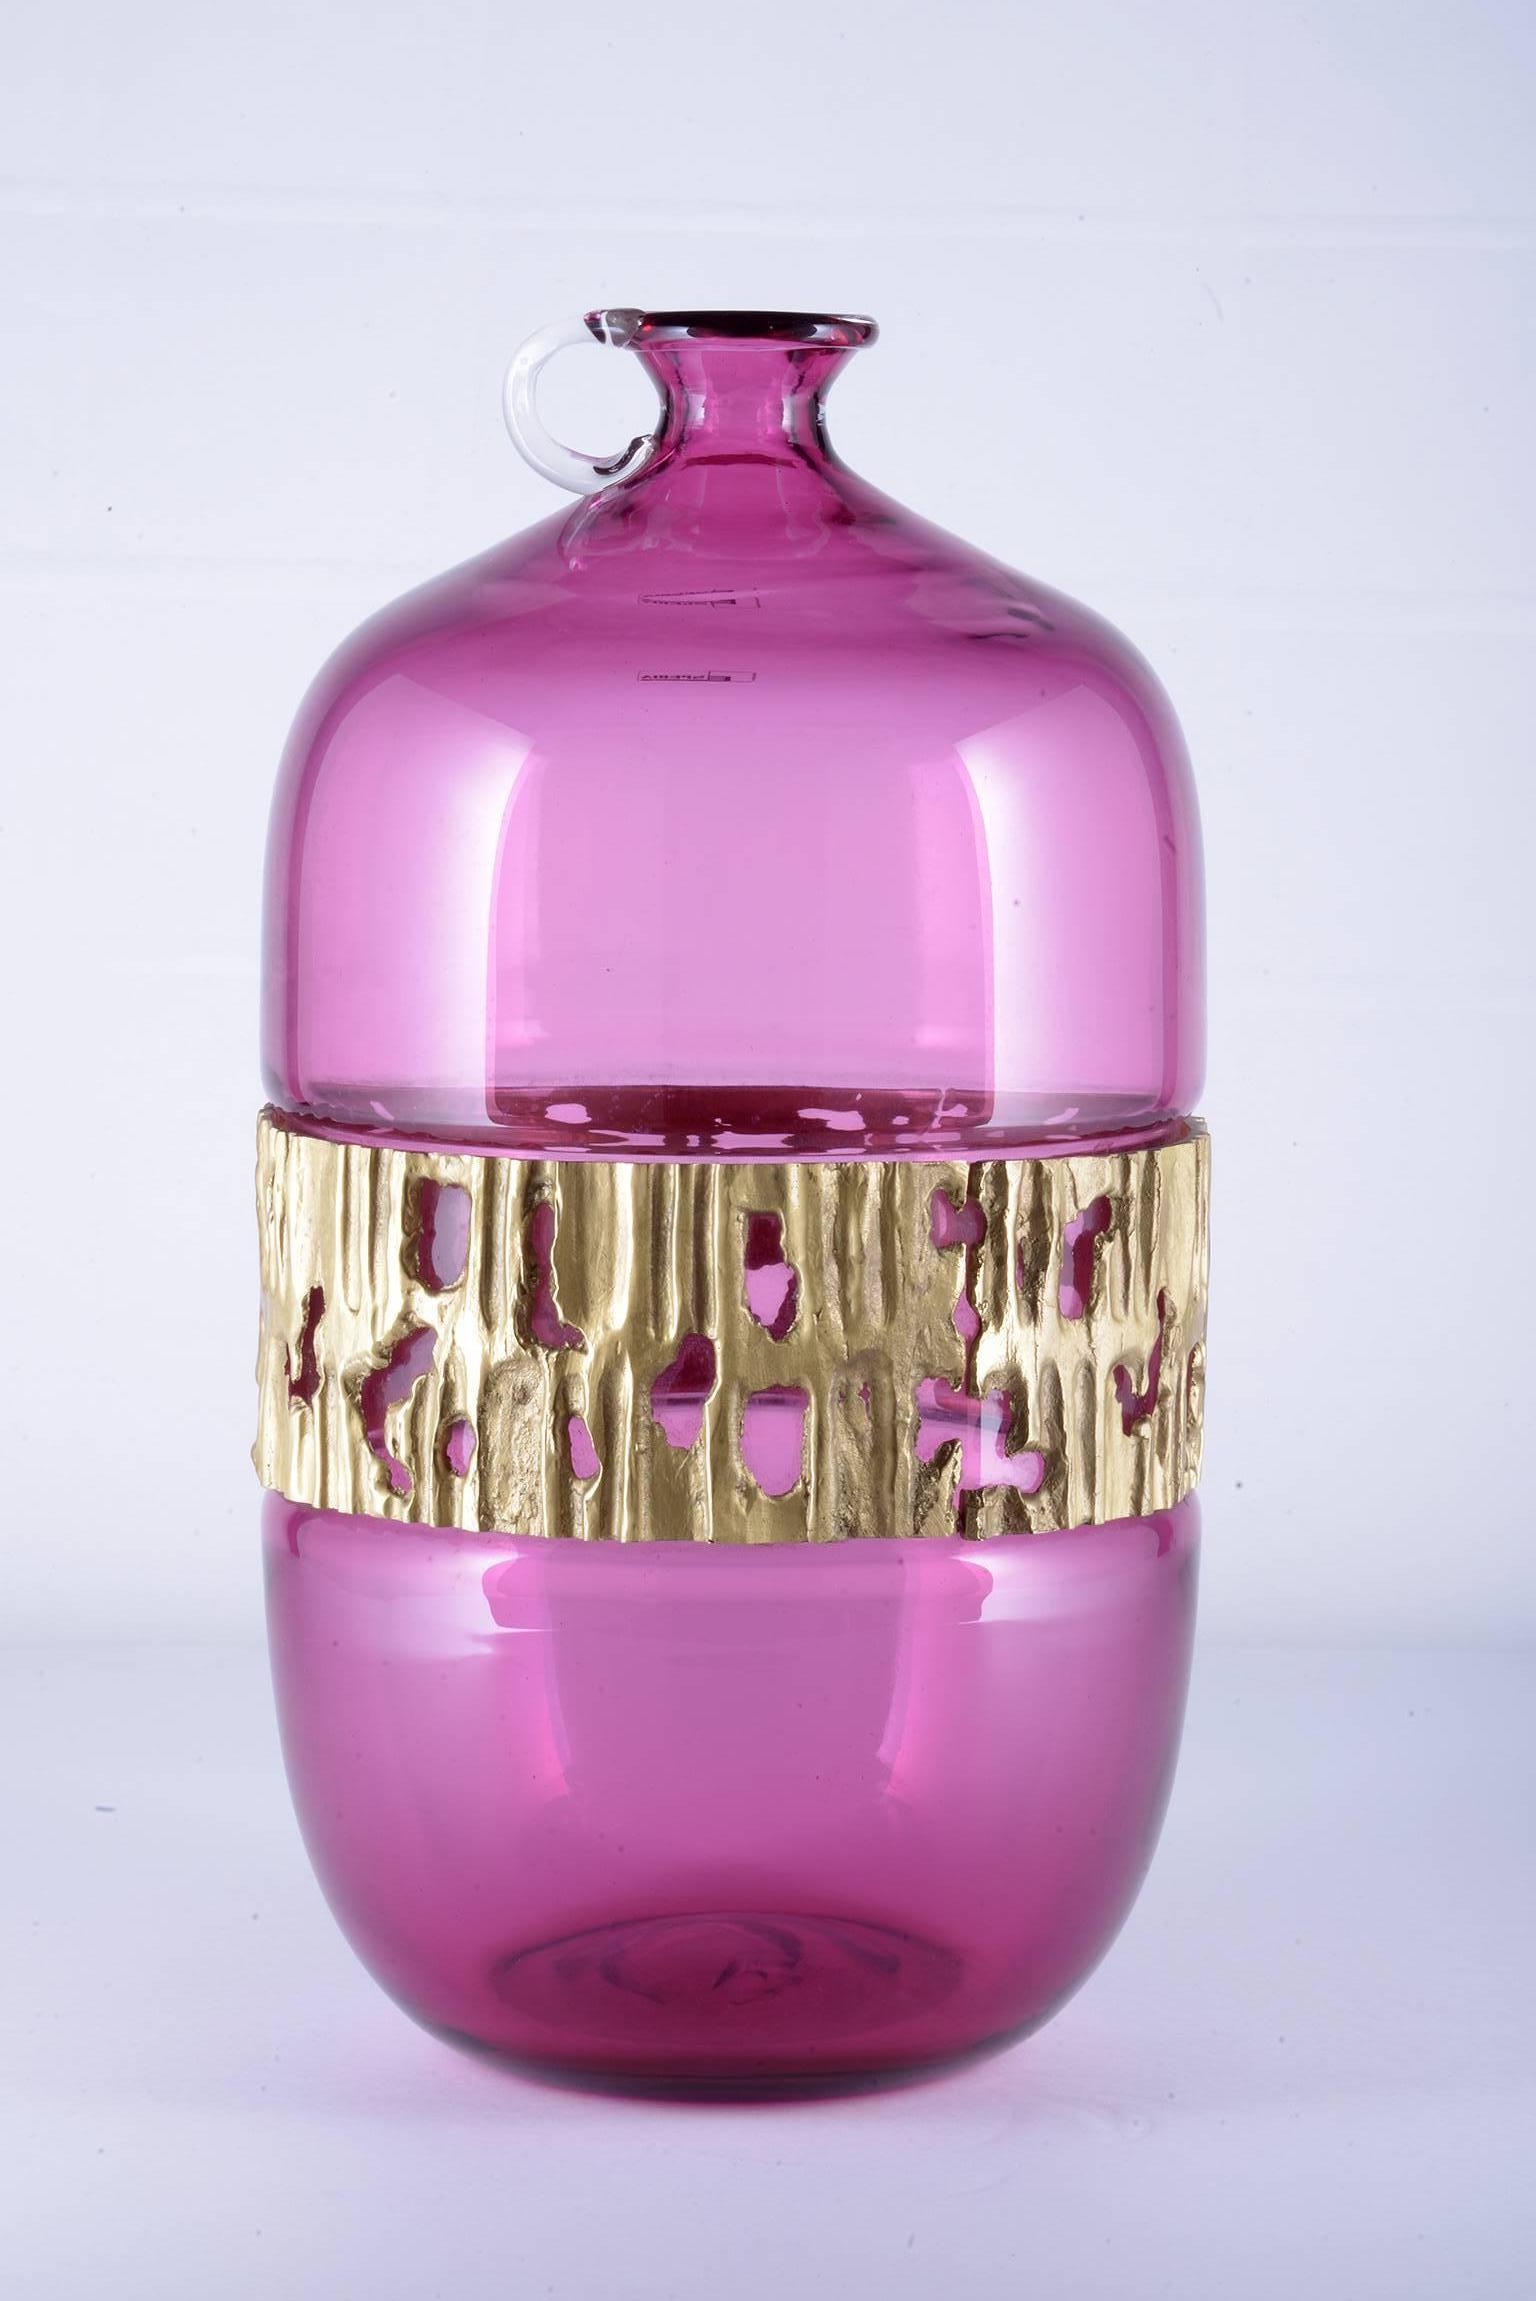 1970s blown amethyist color glass decorated with encased cust gold bronze.
Signed Brotto on the bronze and original Esperia label on the glass.
Italy Mid-Century Modern Brutalist.